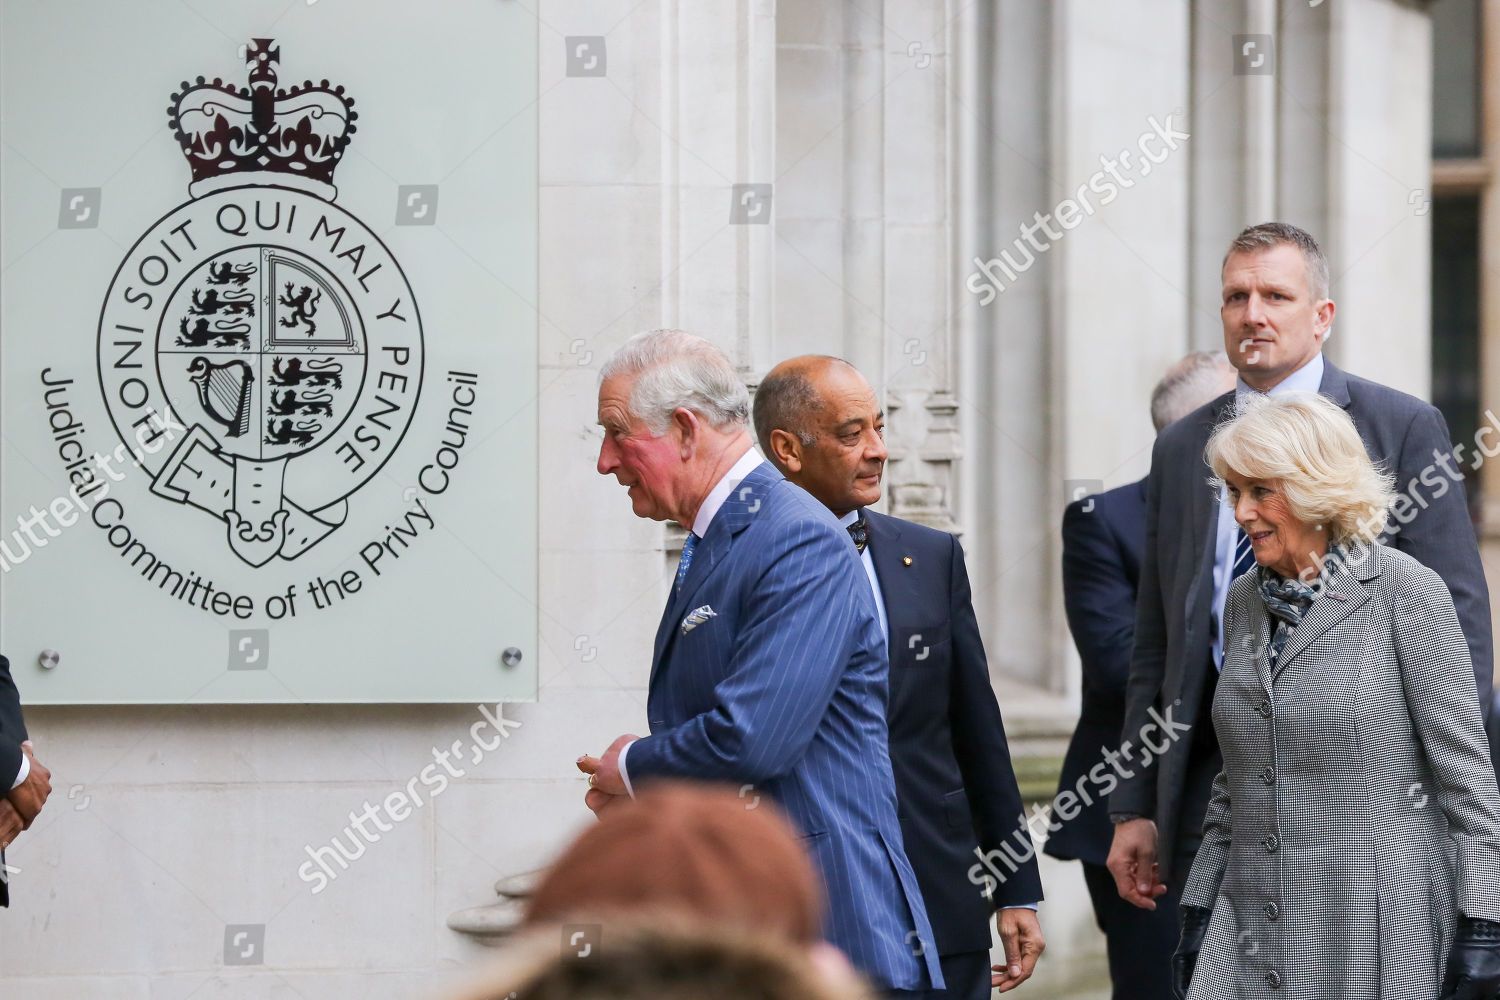 prince-charles-and-camilla-duchess-of-cornwall-visit-to-the-supreme-court-london-uk-shutterstock-editorial-10088523d.jpg